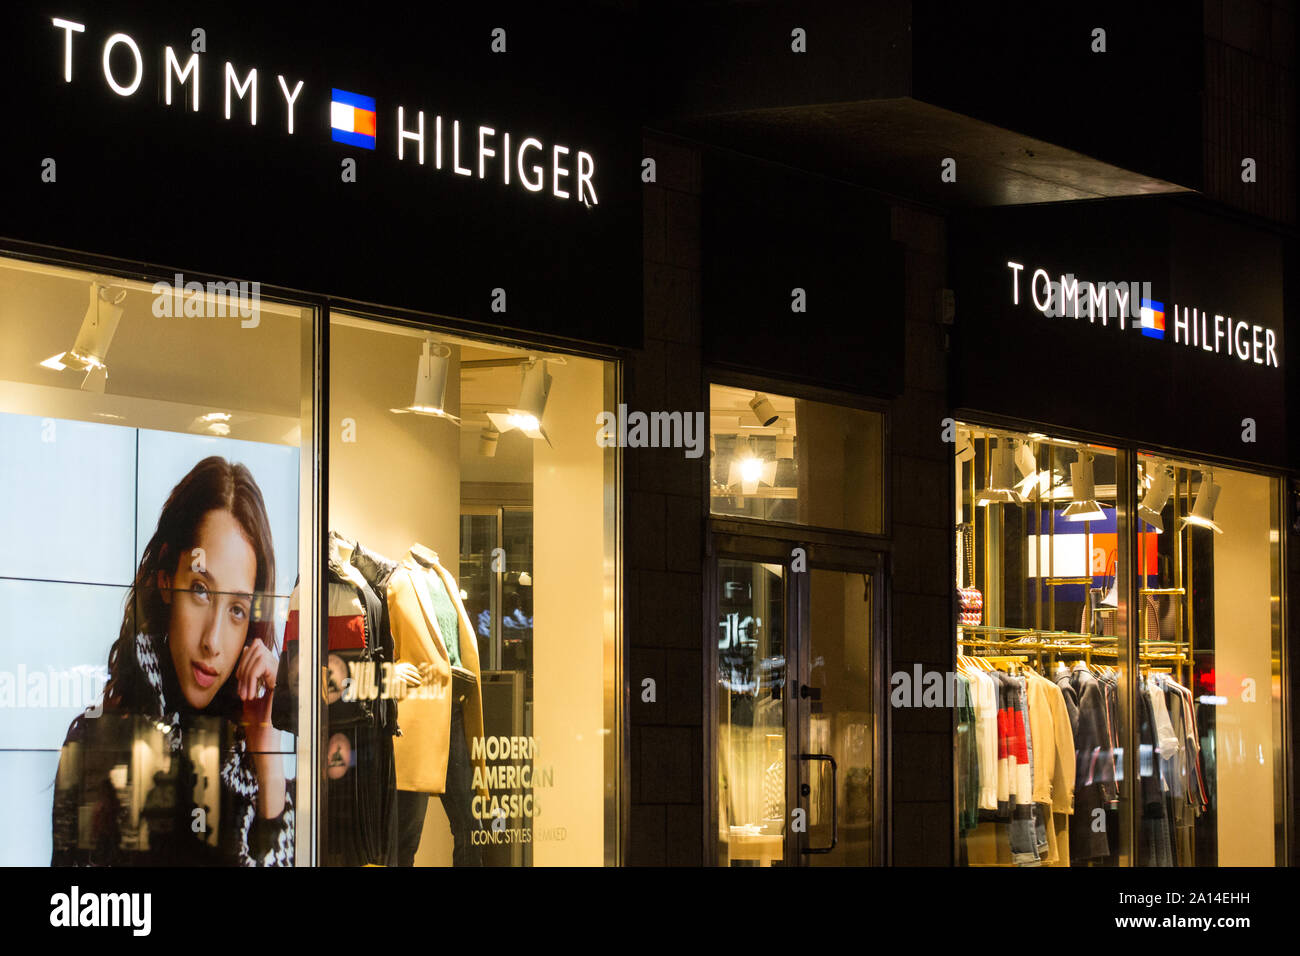 Tommy Hilfiger Clothing Brand Discounted Order, 63% OFF | asrehazir.com